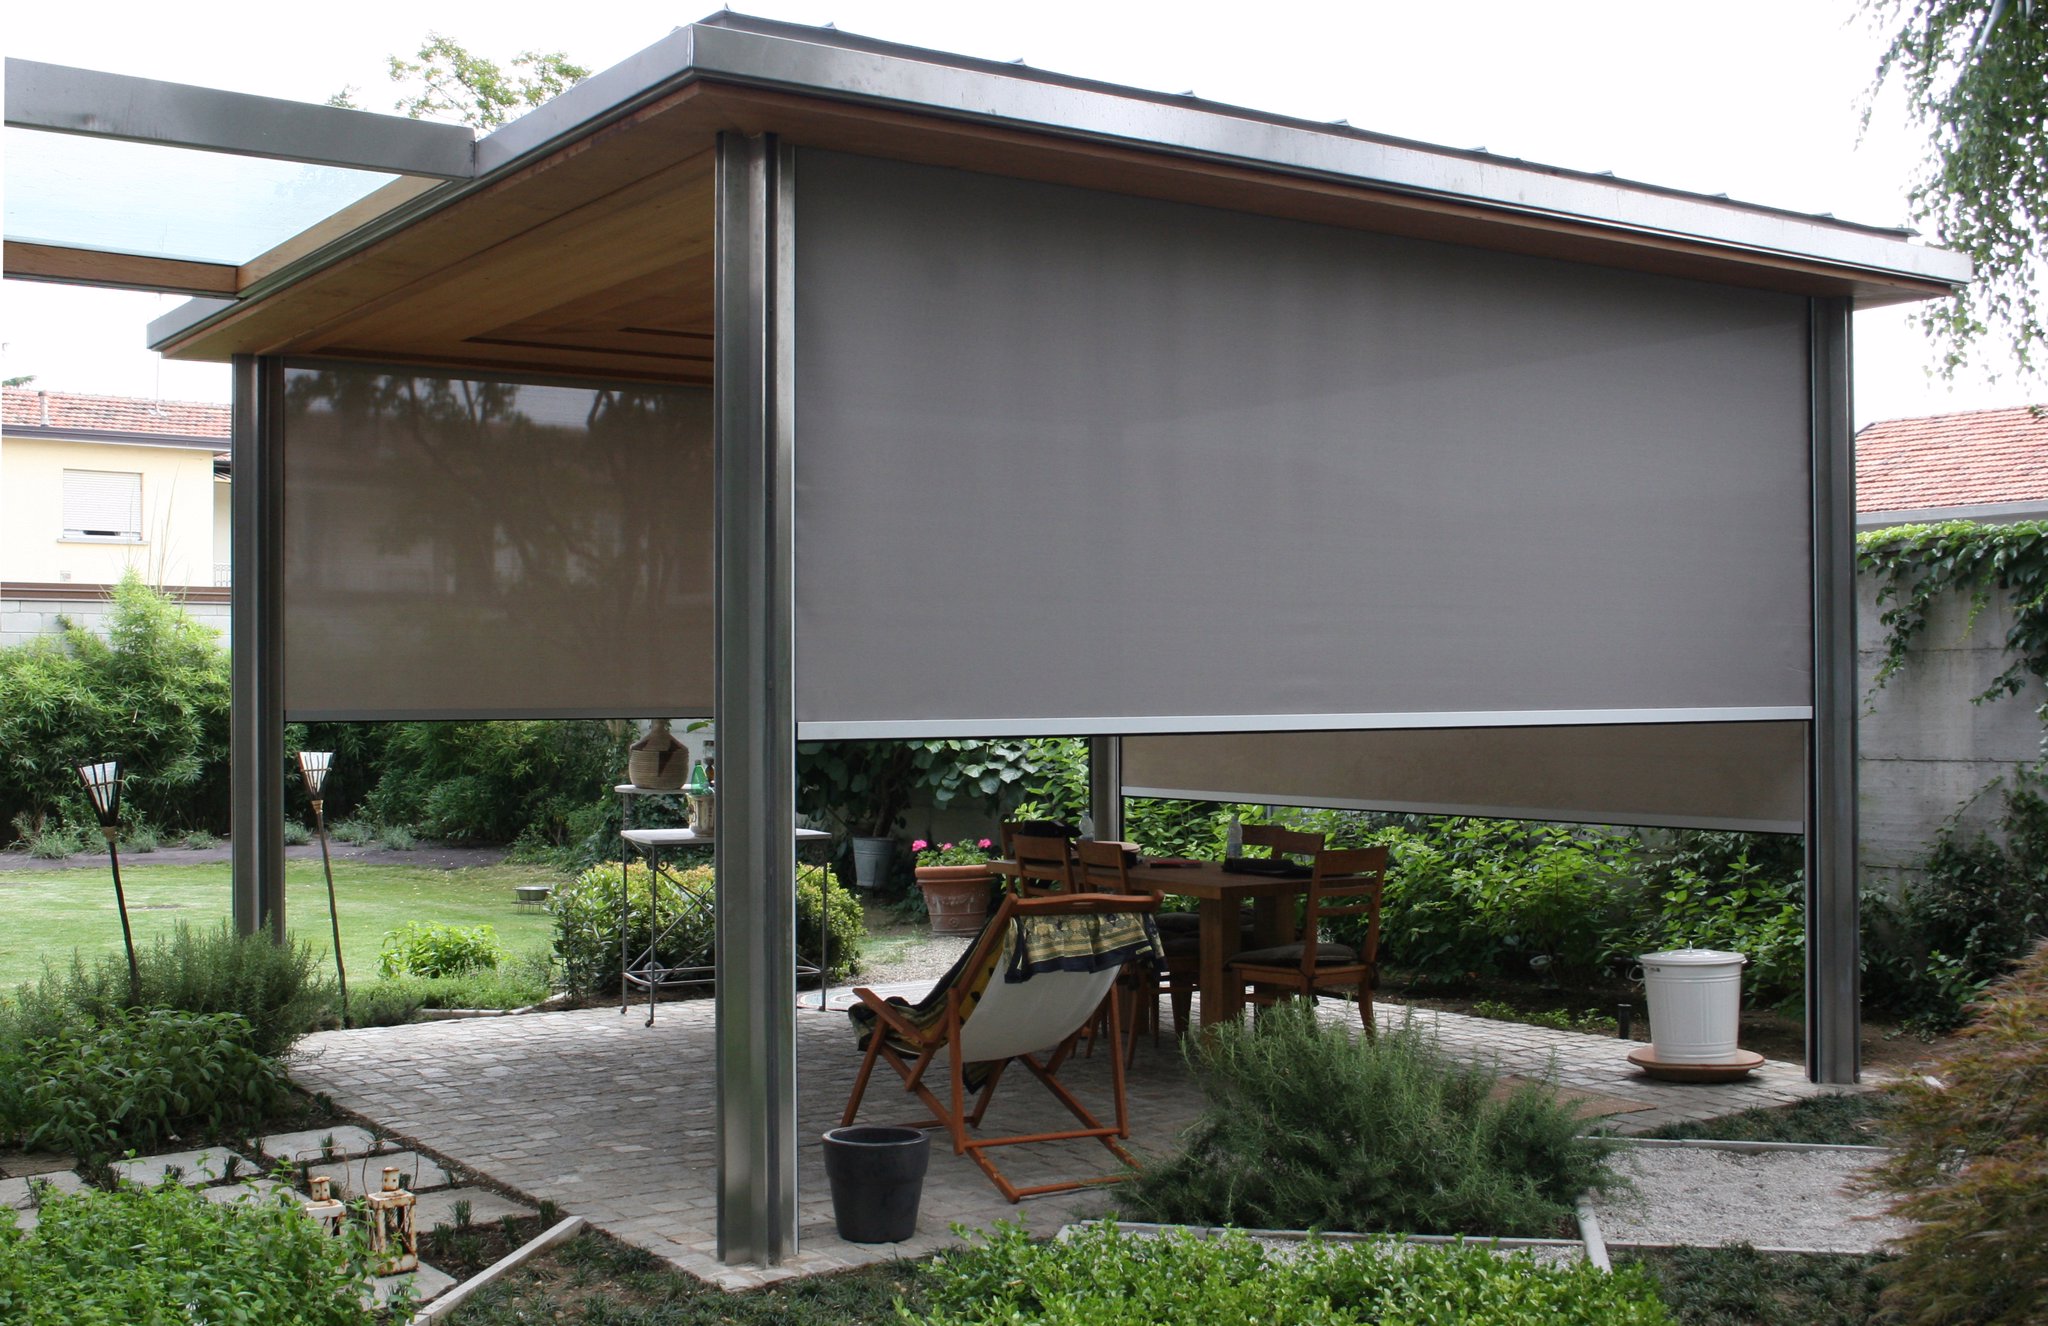 Reasons You Should Add Zip track Blinds to Your Melbourne Home